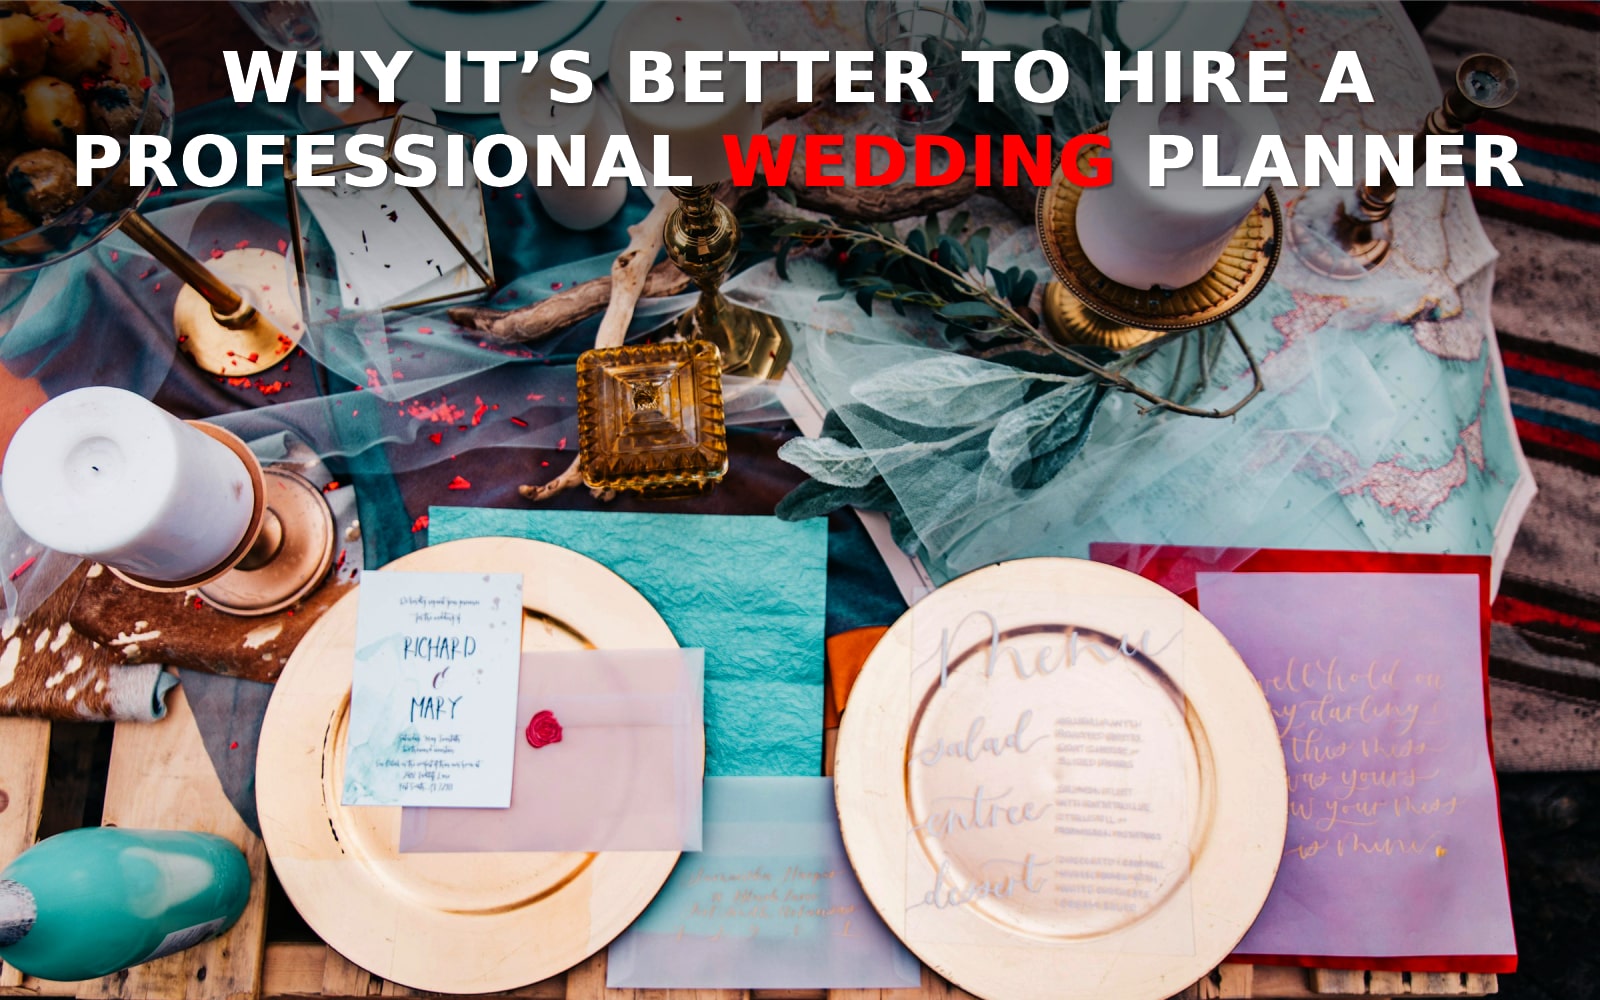 Why it’s better to hire a professional wedding planner